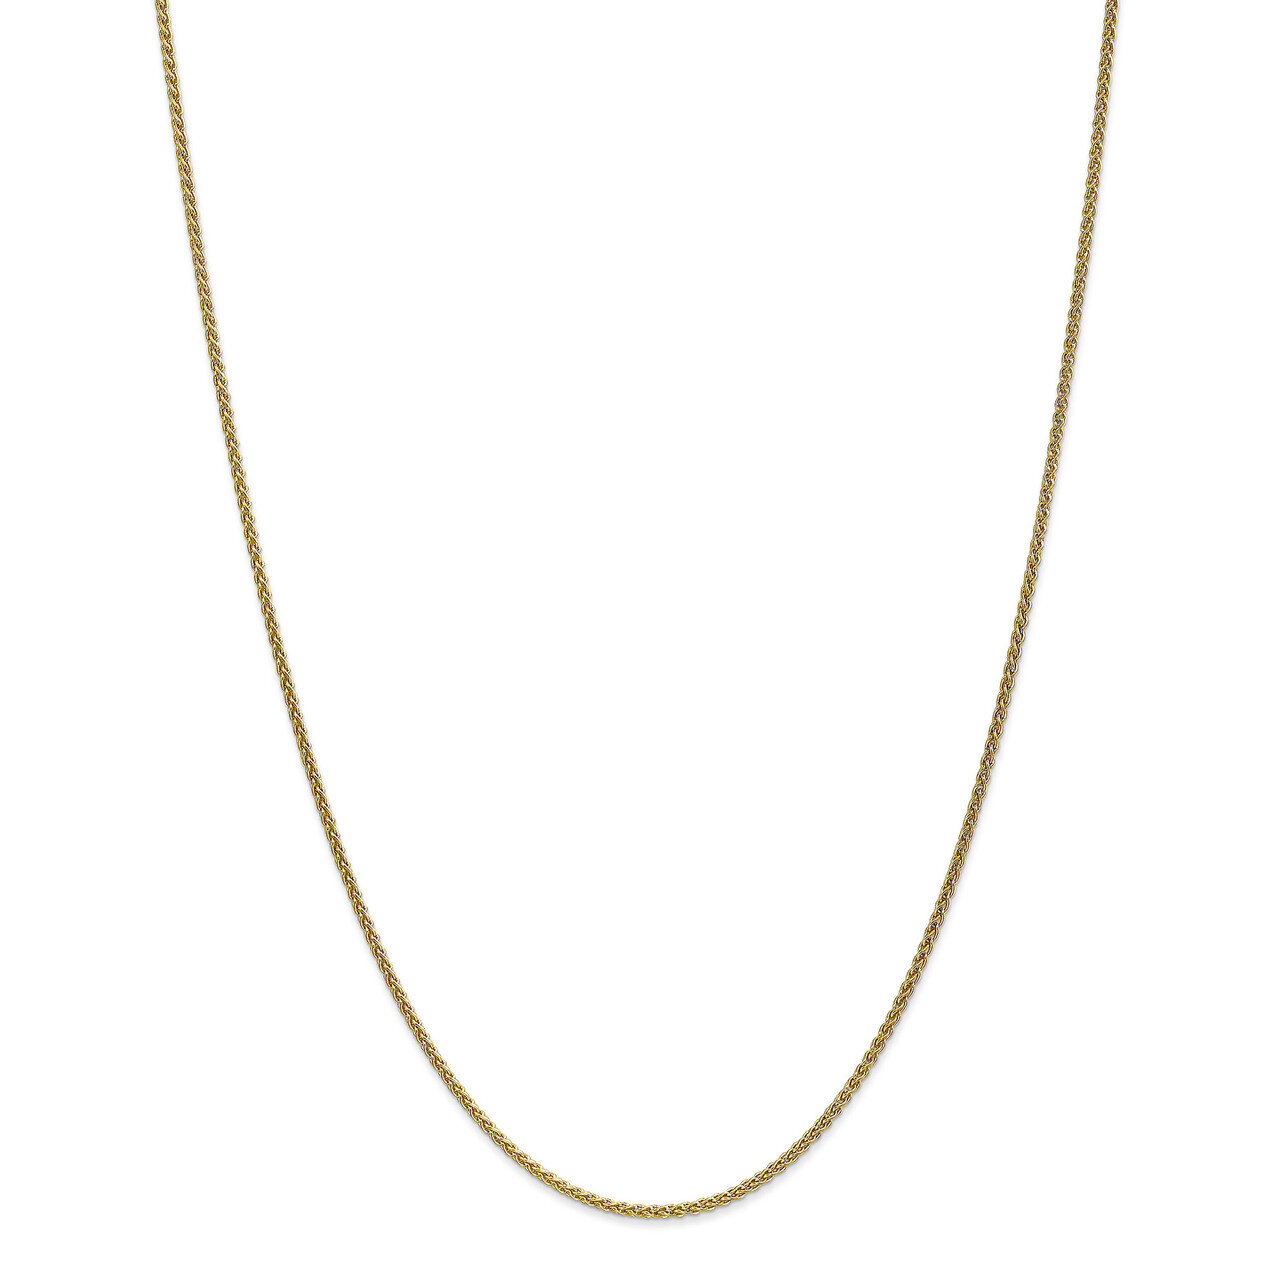 16 Inch 1.65mm Solid Polished Spiga Chain 10k Gold 10SPG040-16